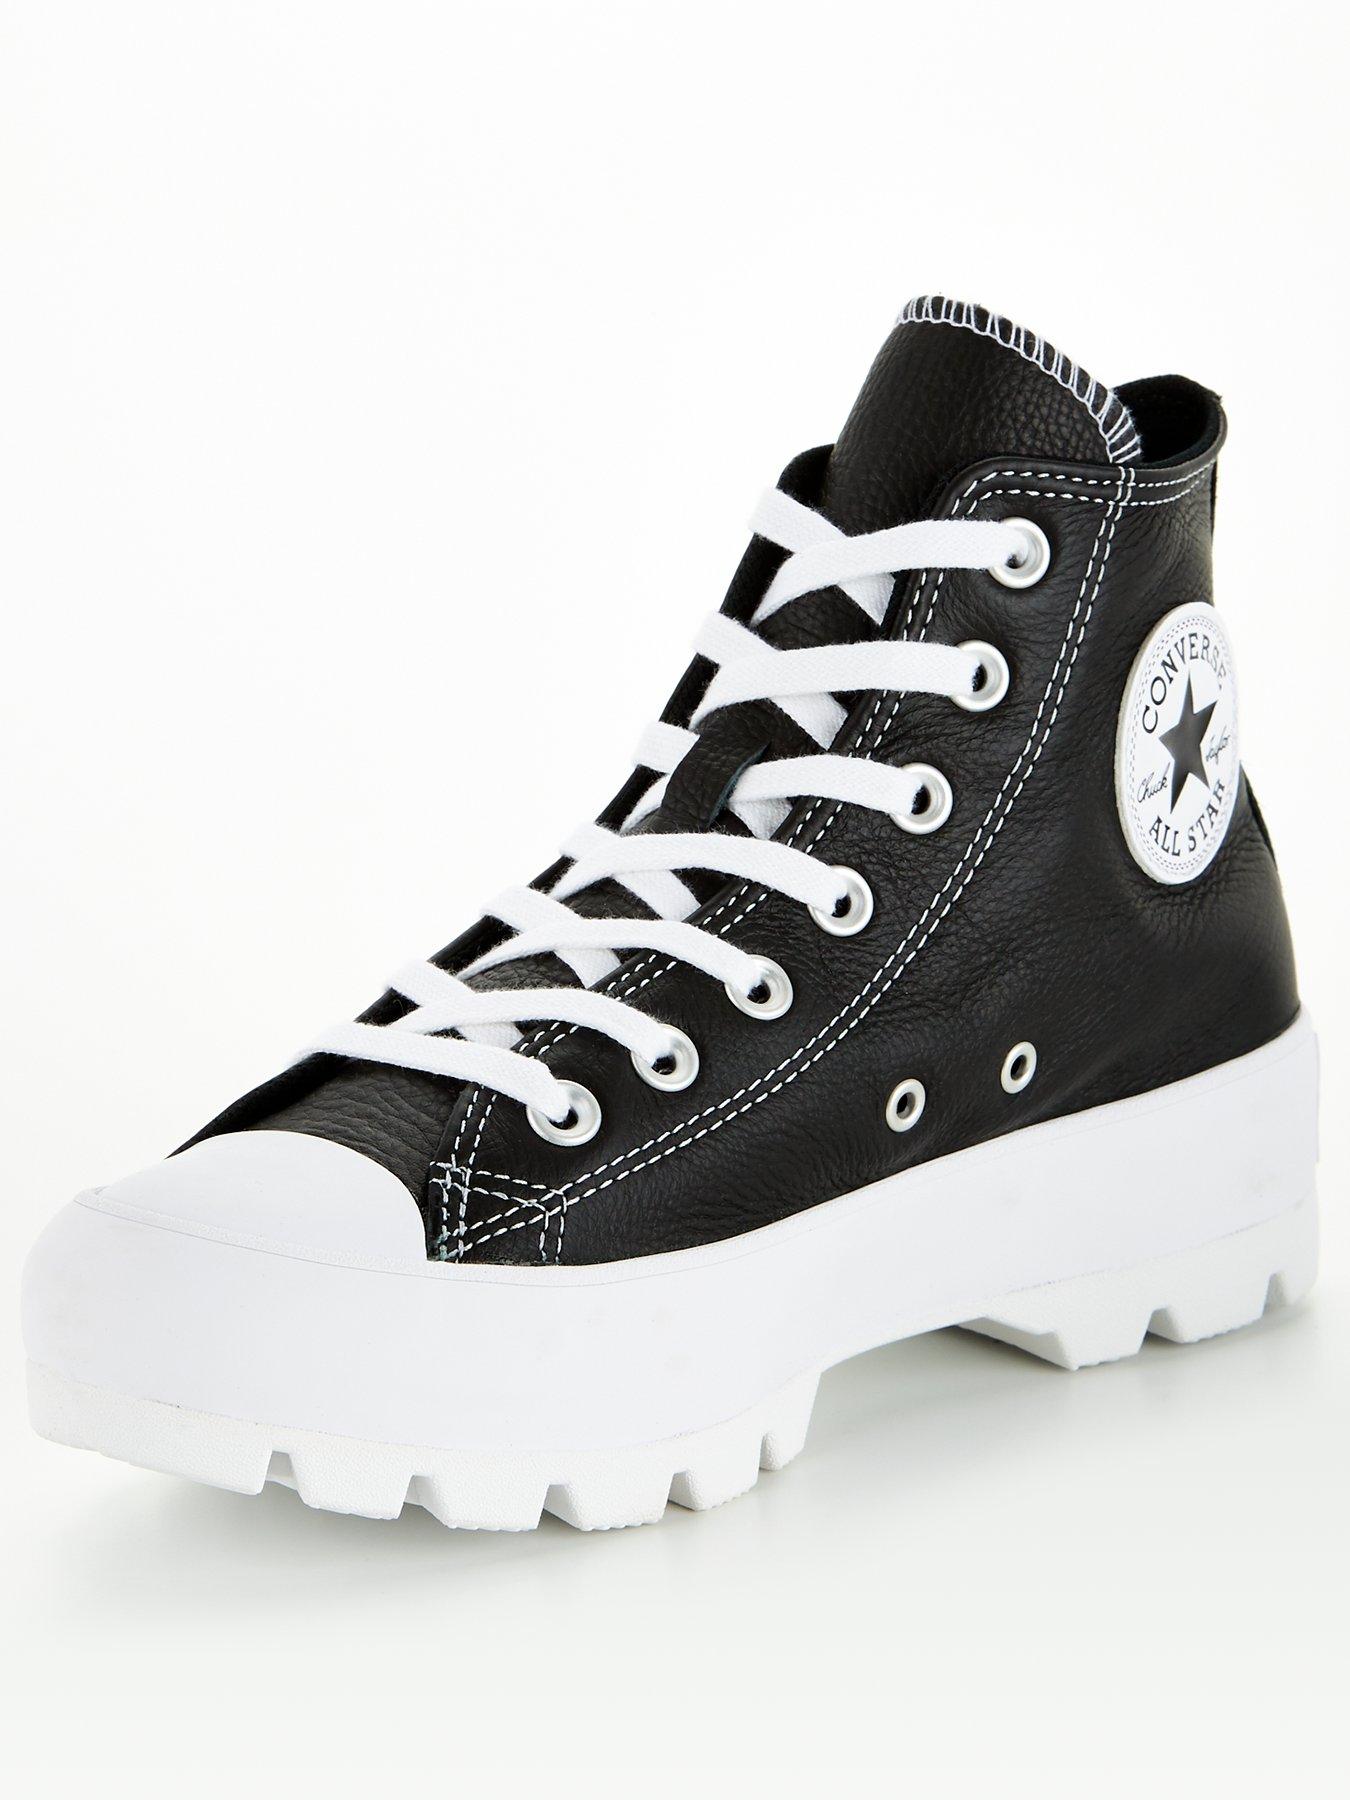 lugged leather chuck taylor all star black